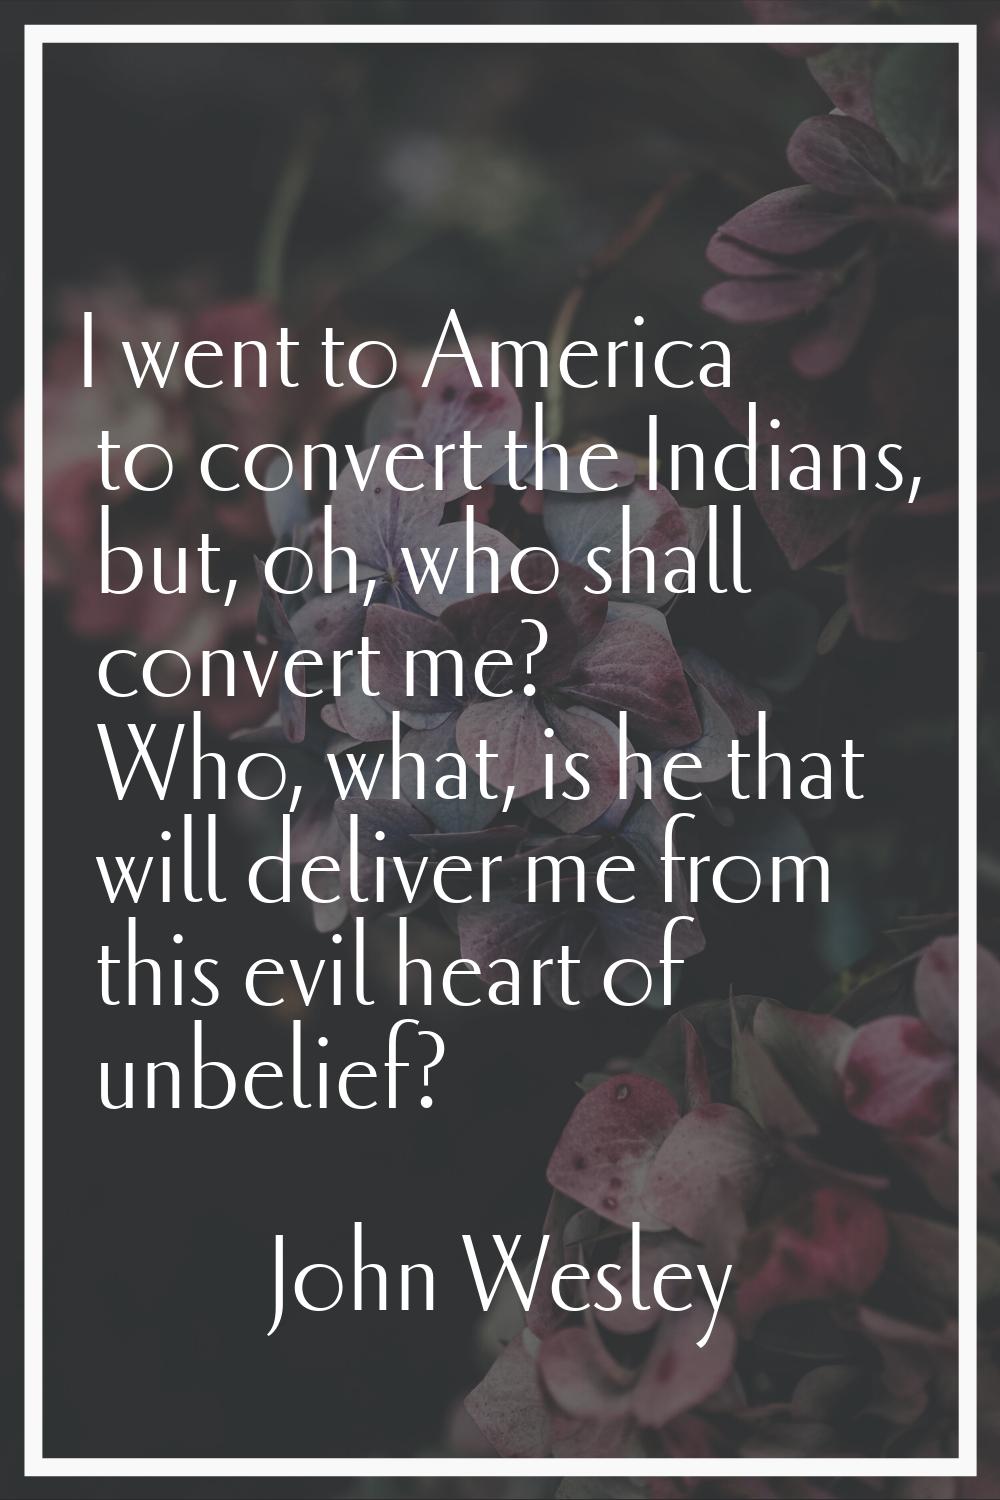 I went to America to convert the Indians, but, oh, who shall convert me? Who, what, is he that will